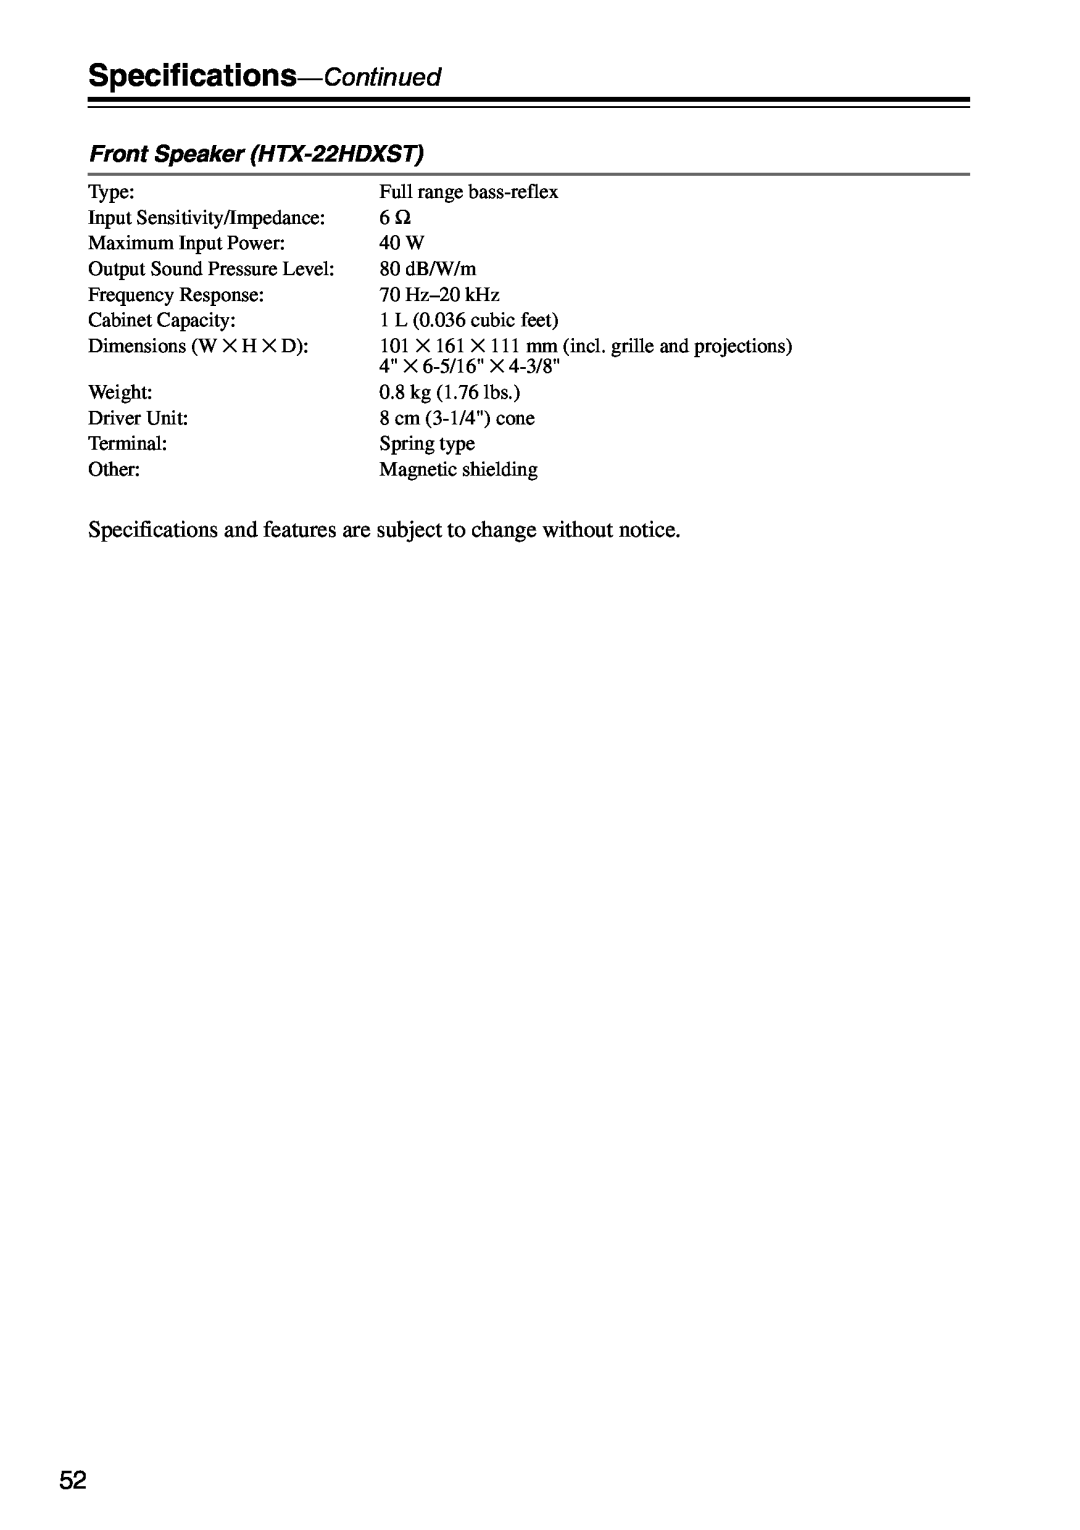 Onkyo HTX-22HDXPAW instruction manual Specifications-Continued, Front Speaker HTX-22HDXST 